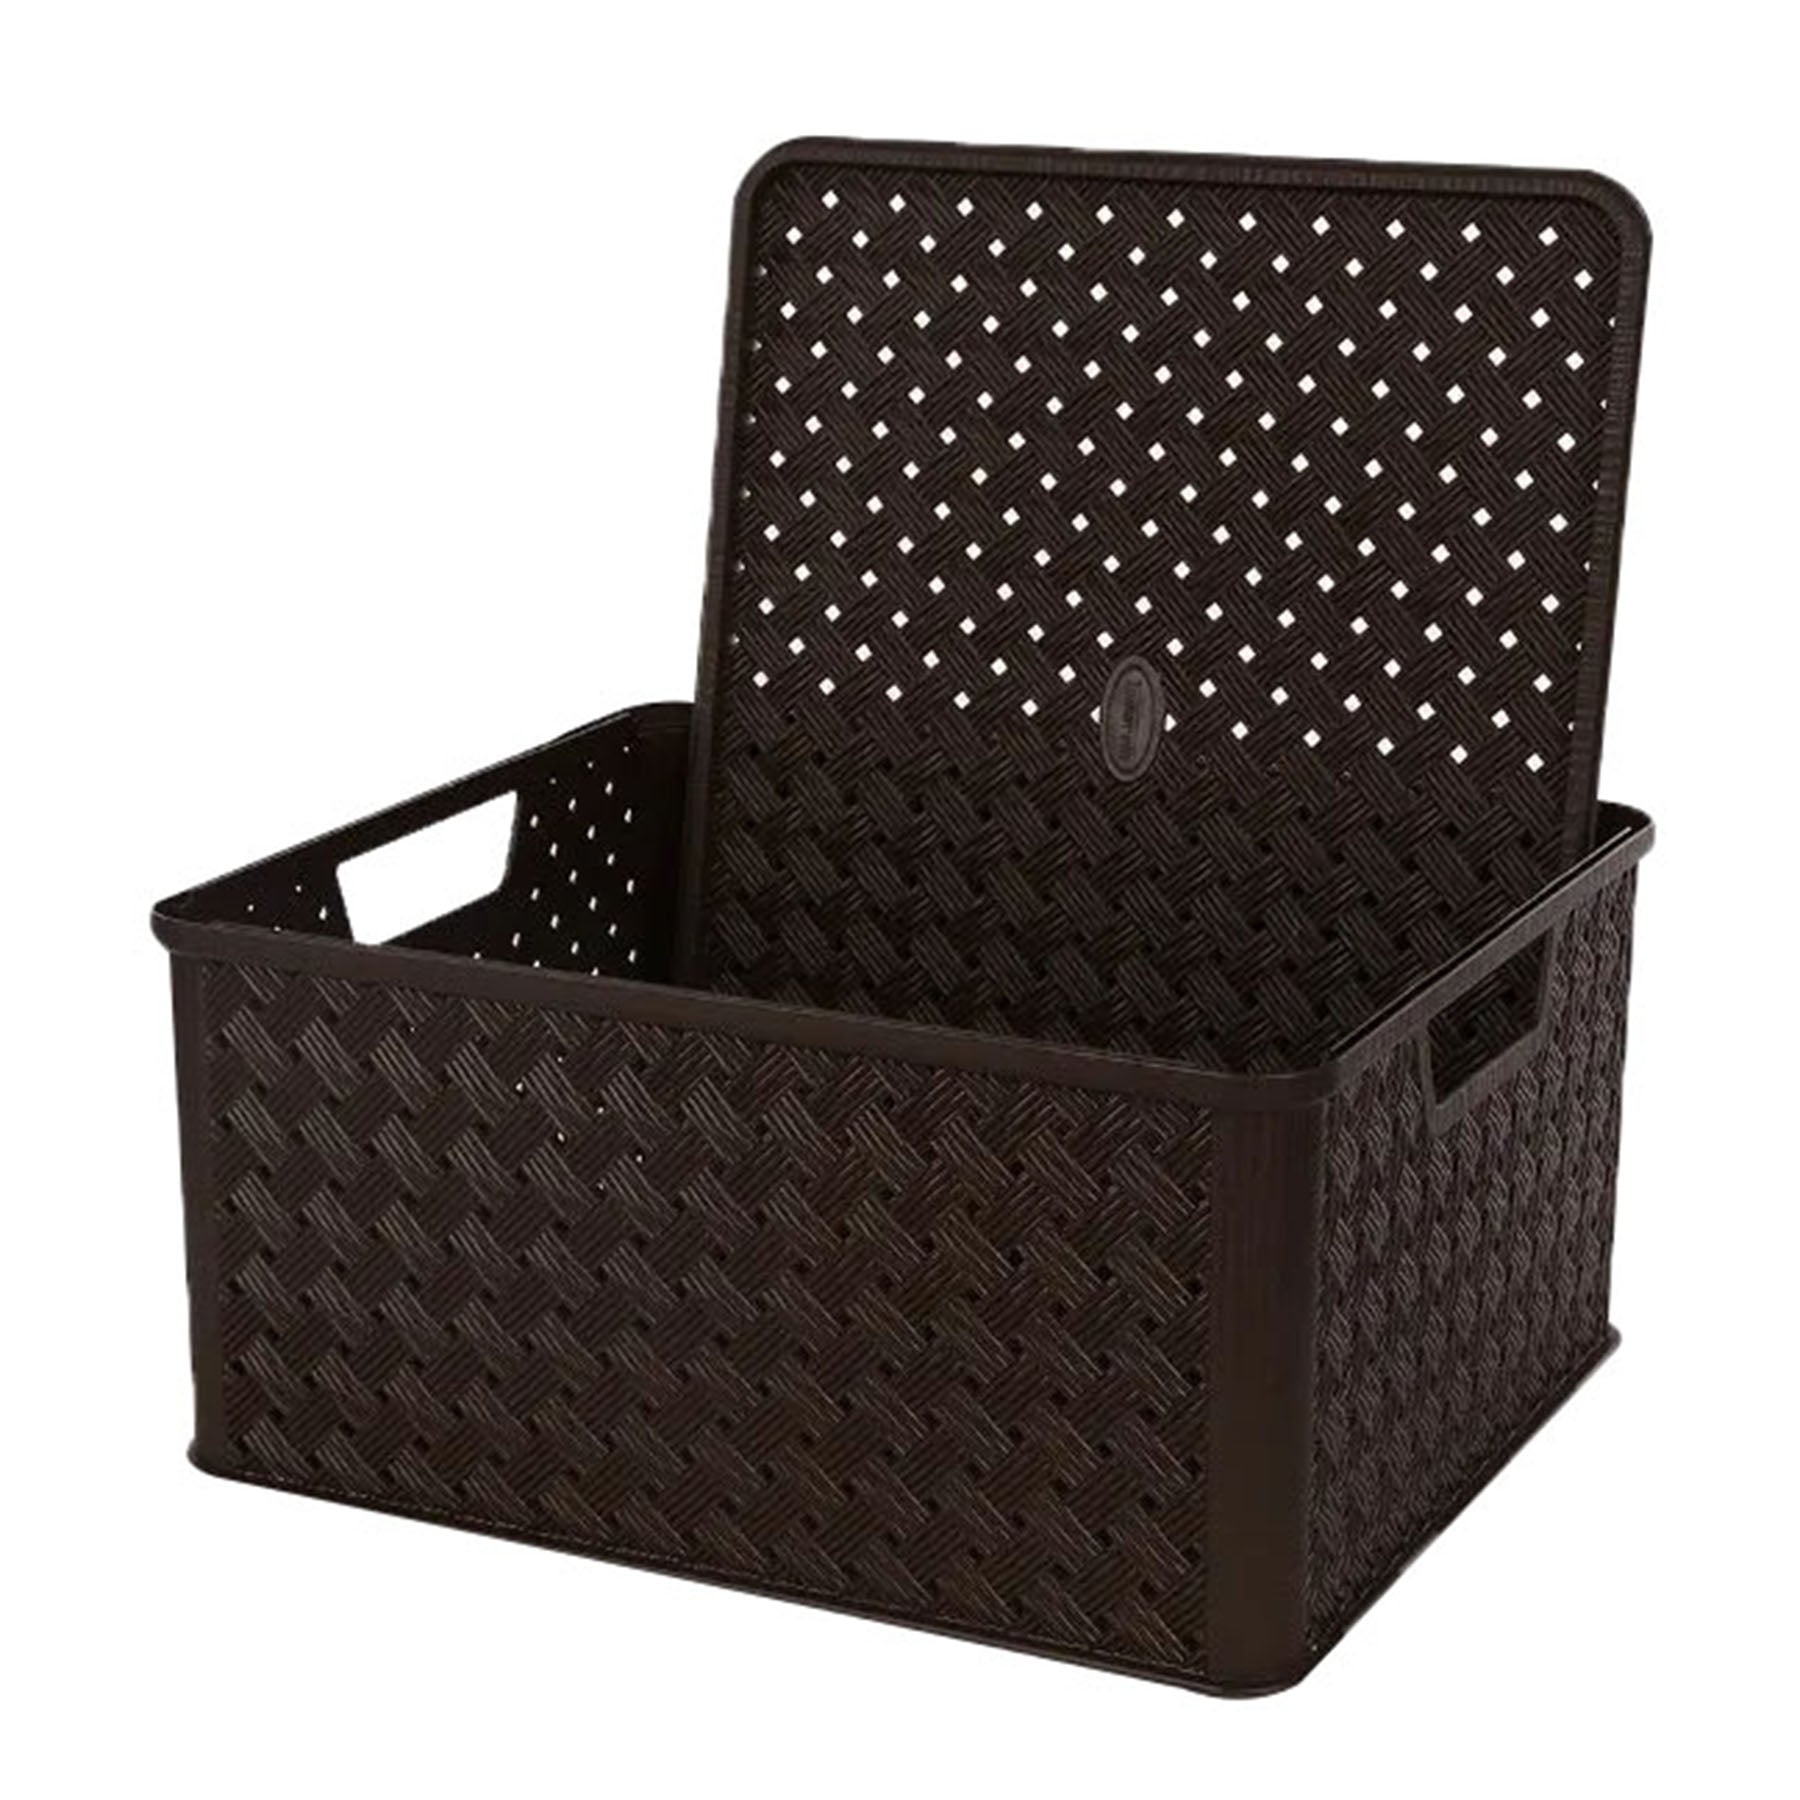 Large box with lid Dimensions: 29 x 33.2 x H 16.5 cm